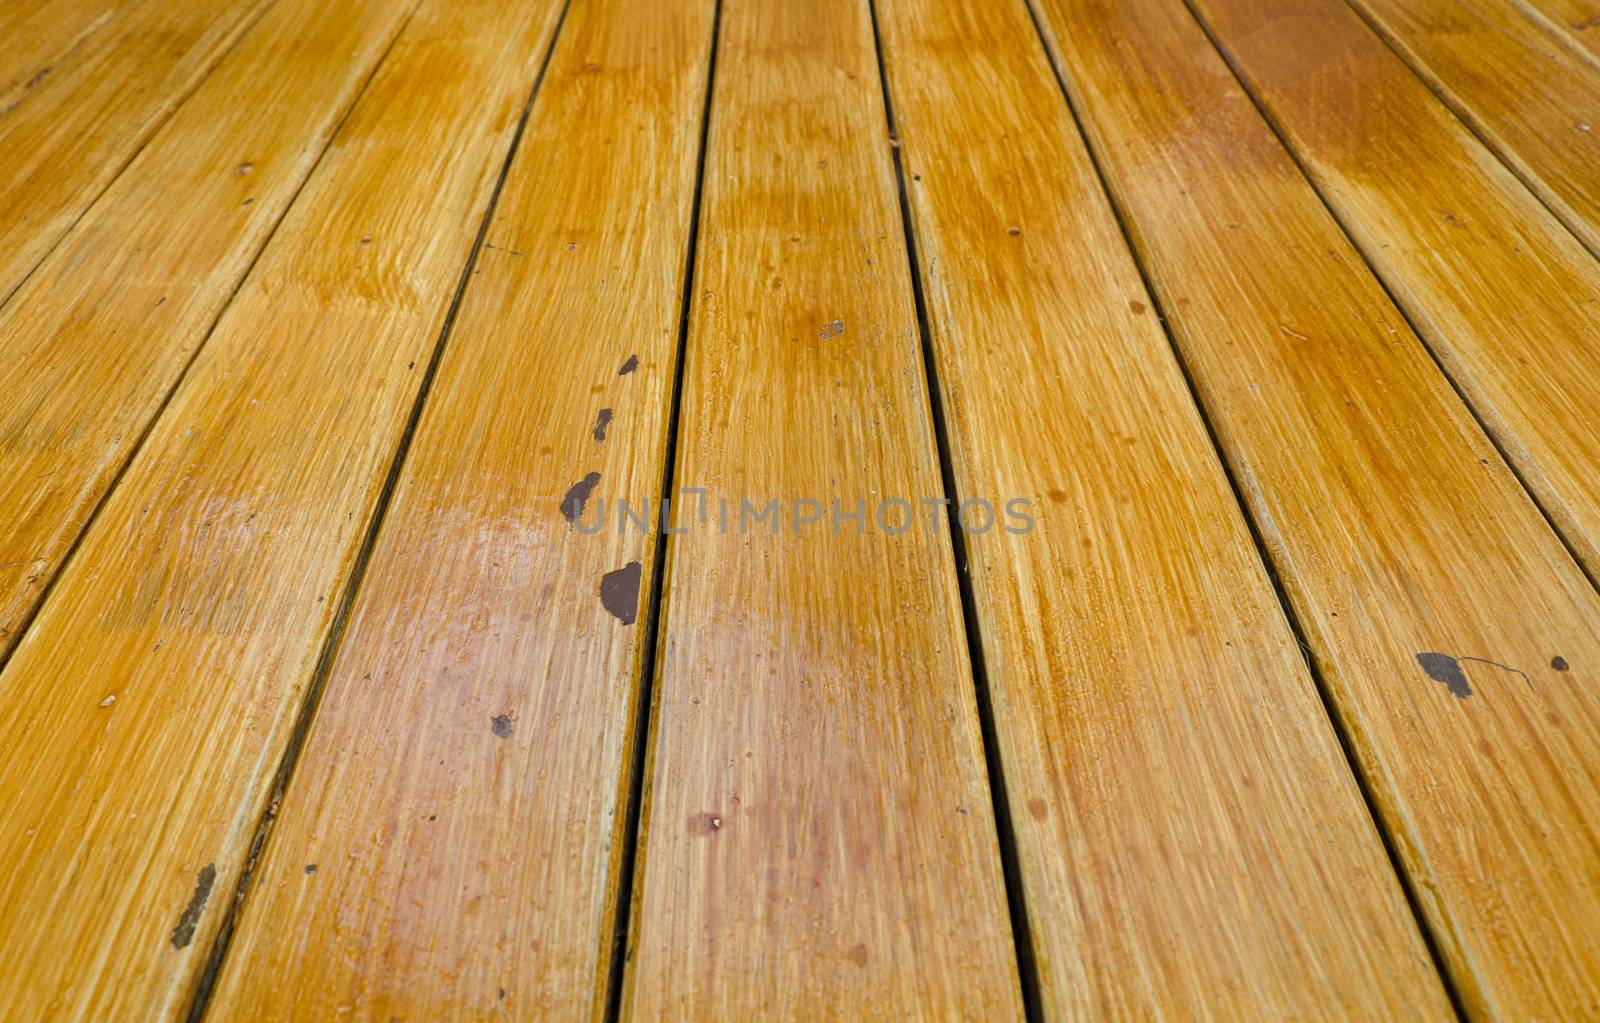 plank wood floor pattern by siraanamwong